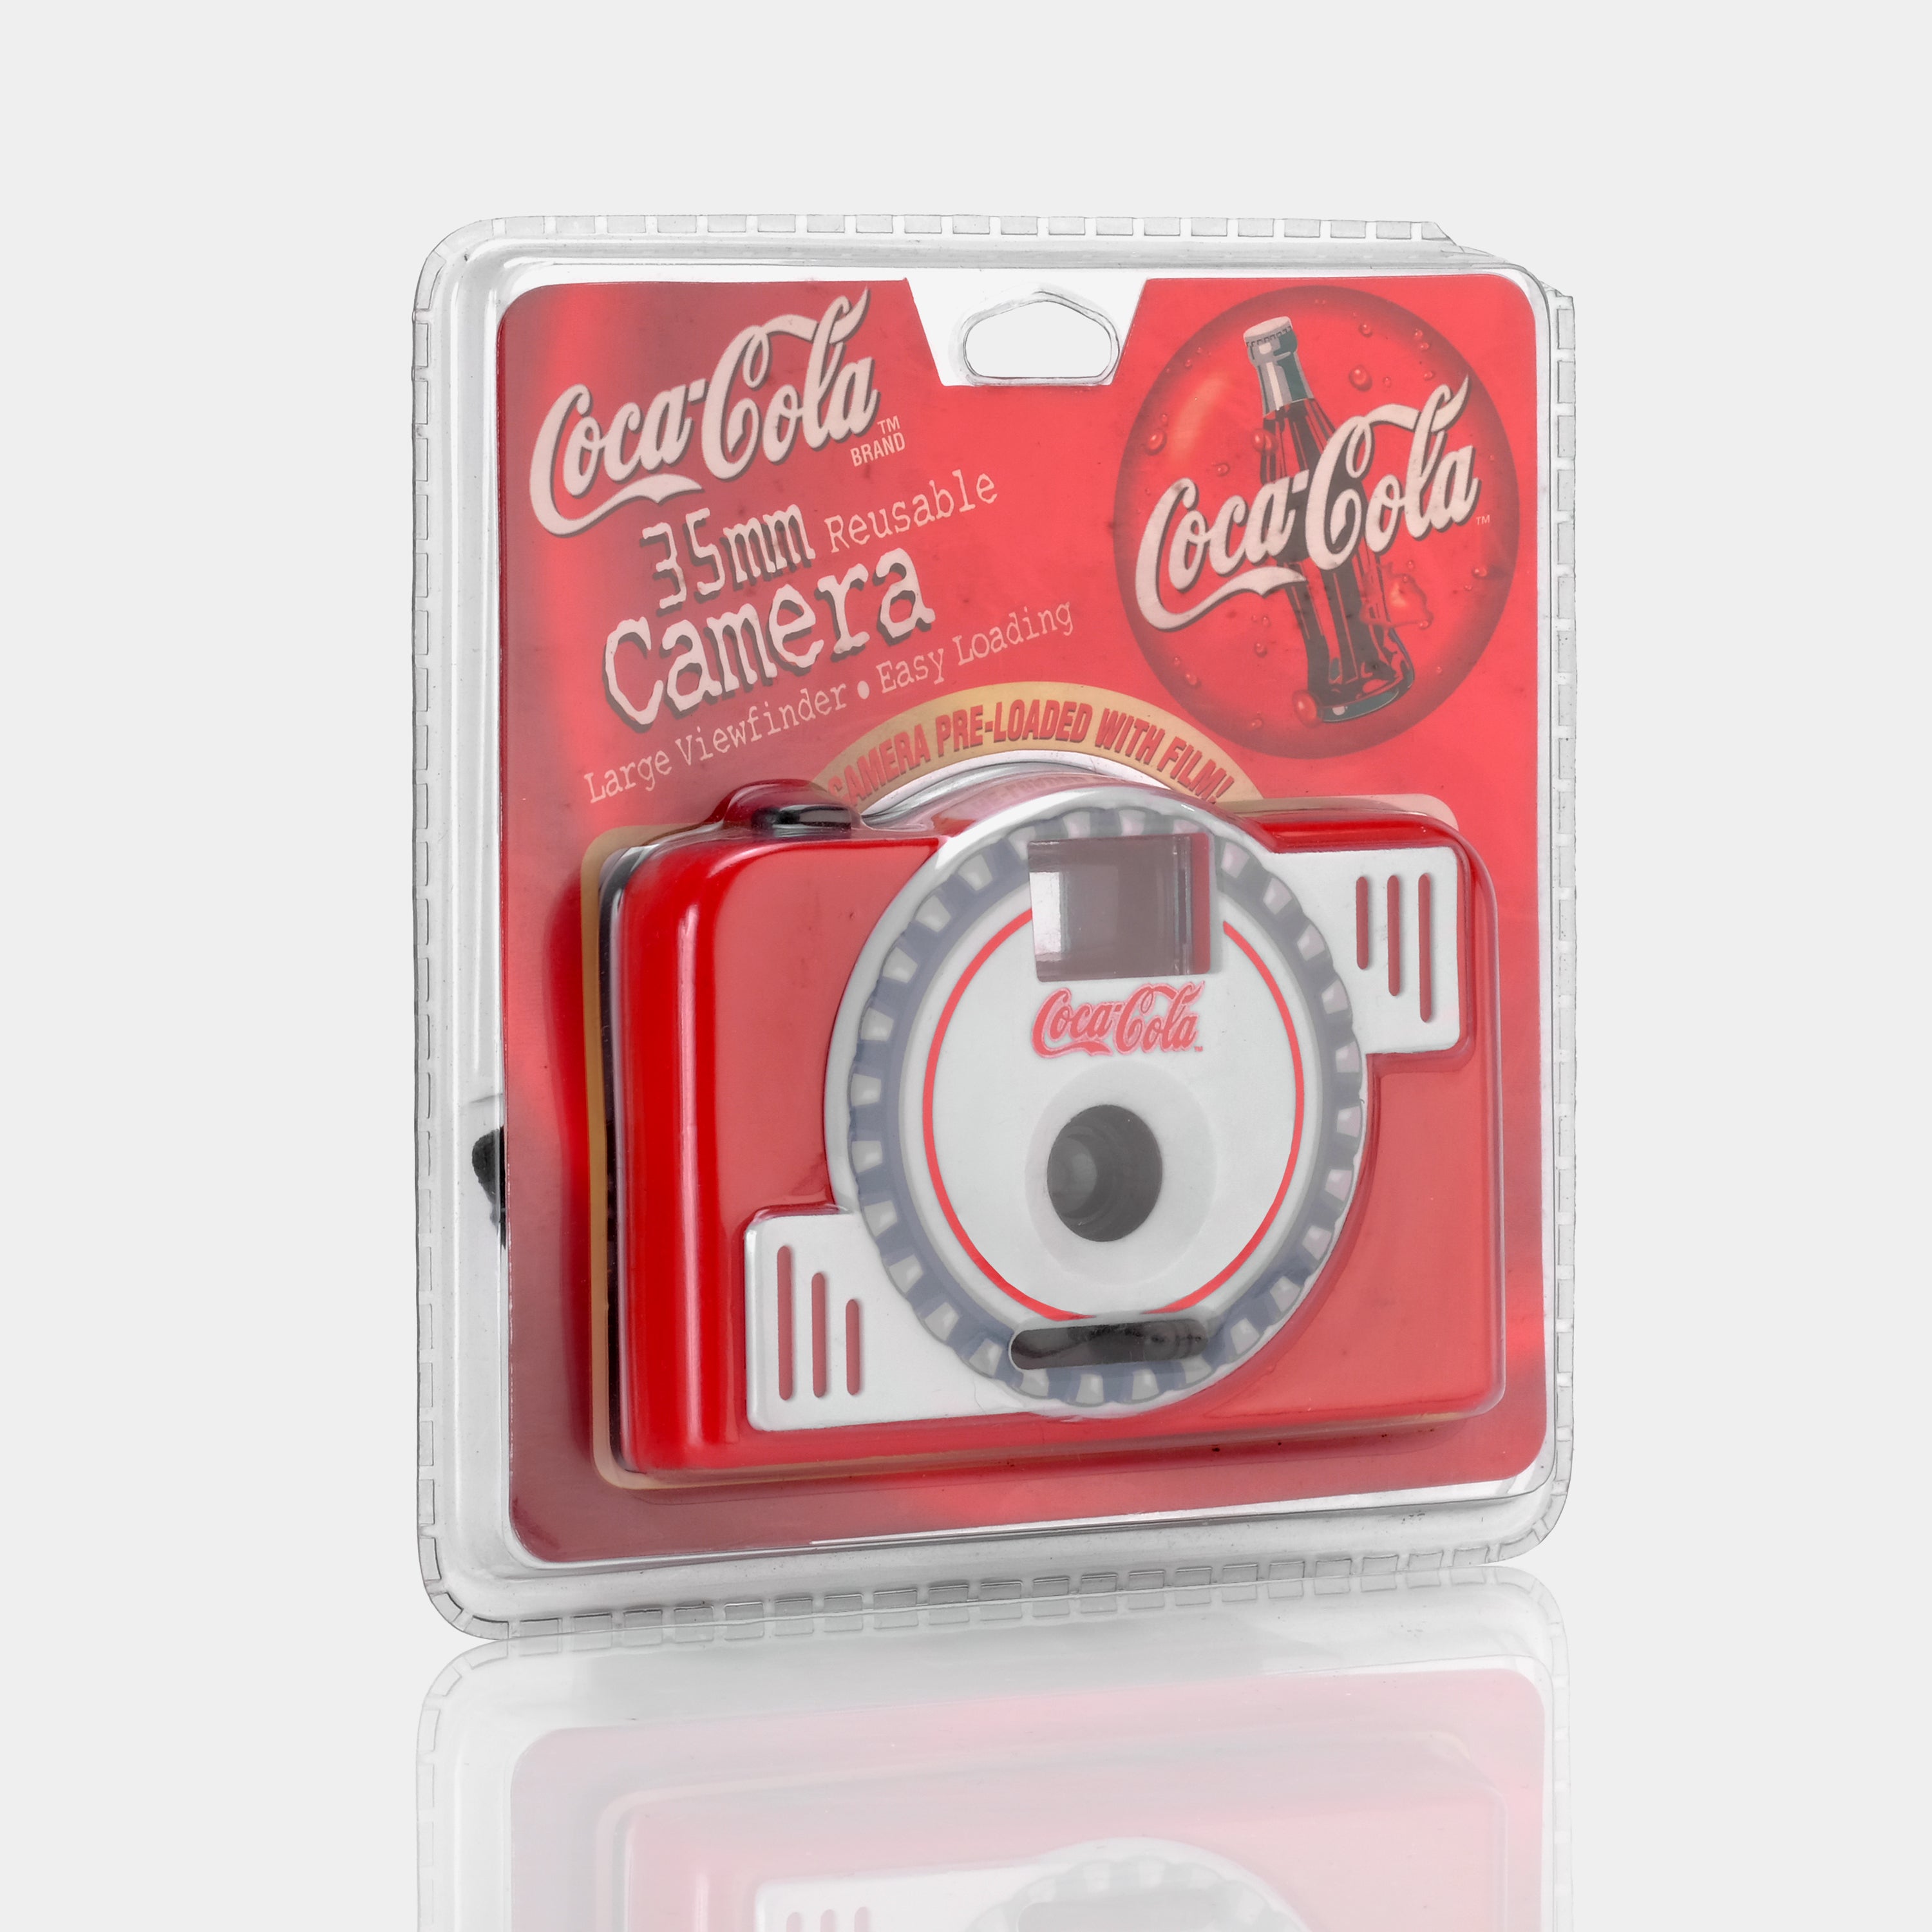 Coca-Cola 35mm Point and Shoot Film Camera (New Old Stock)